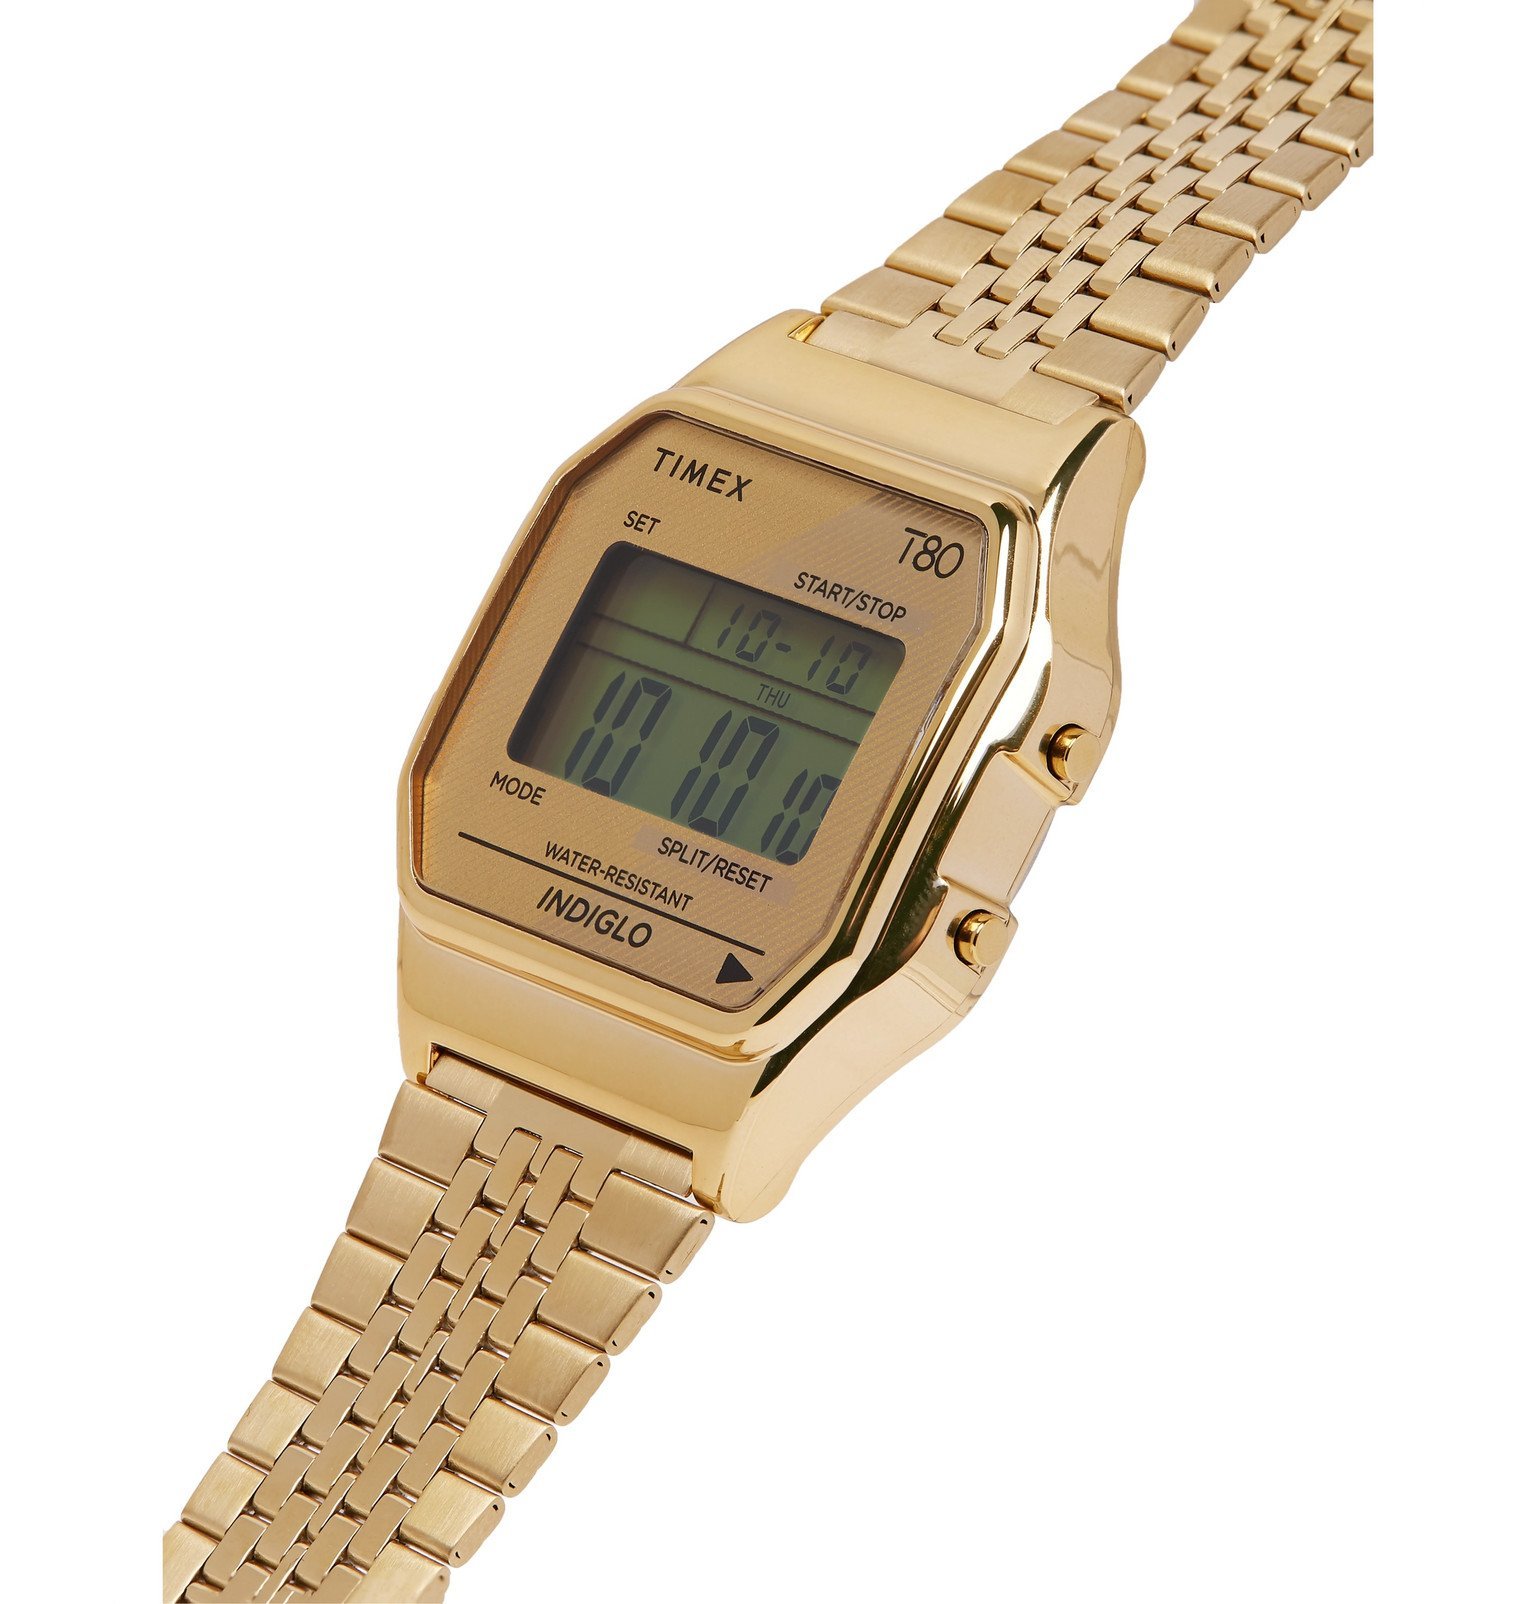 Timex - T80 34mm Gold-Tone Stainless Steel Digital Watch - Gold Timex